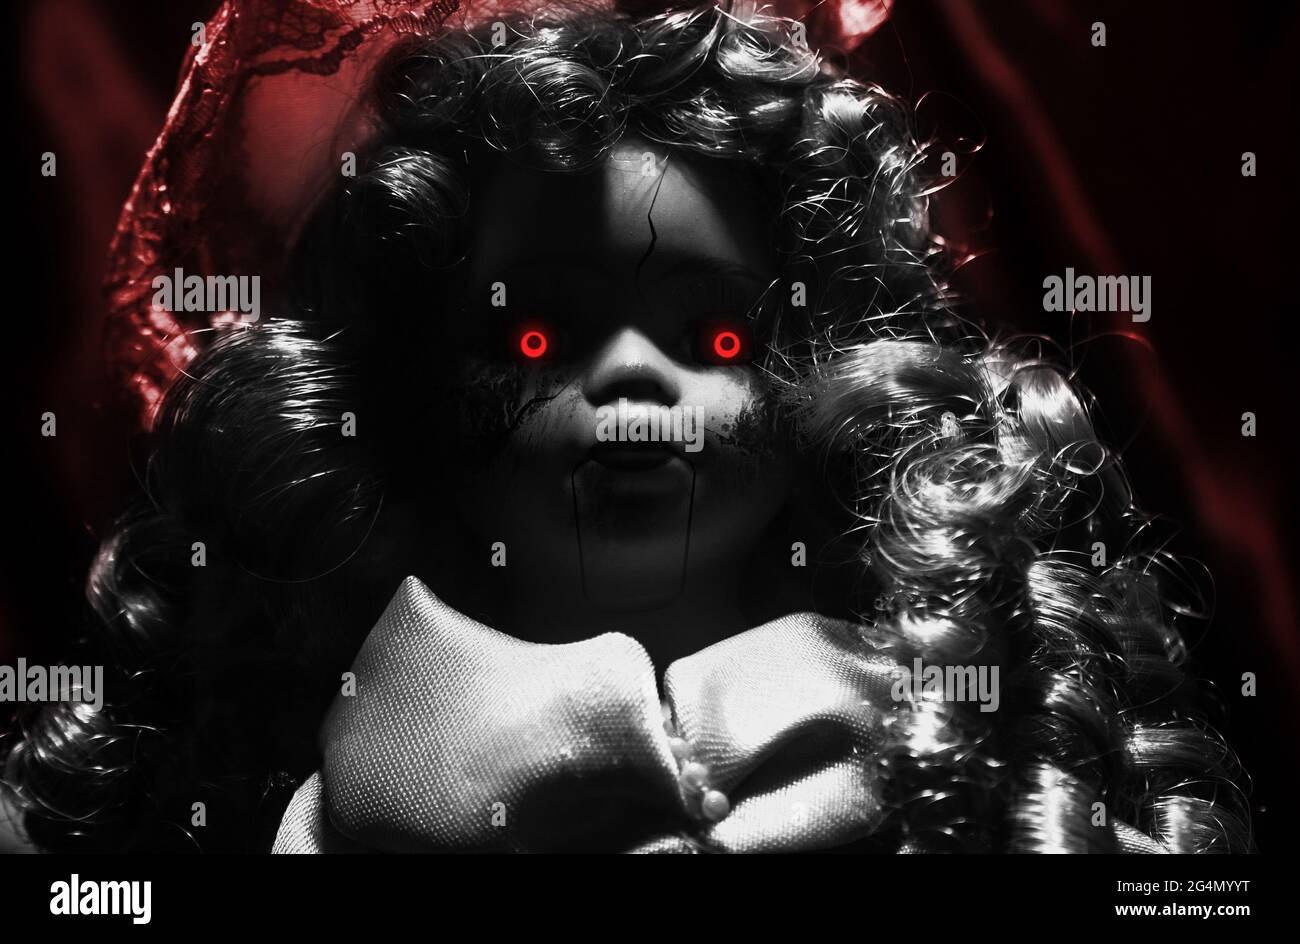 Horror photo of scary demon possessed plastic doll with glowing red eyes on  dark background Stock Photo - Alamy